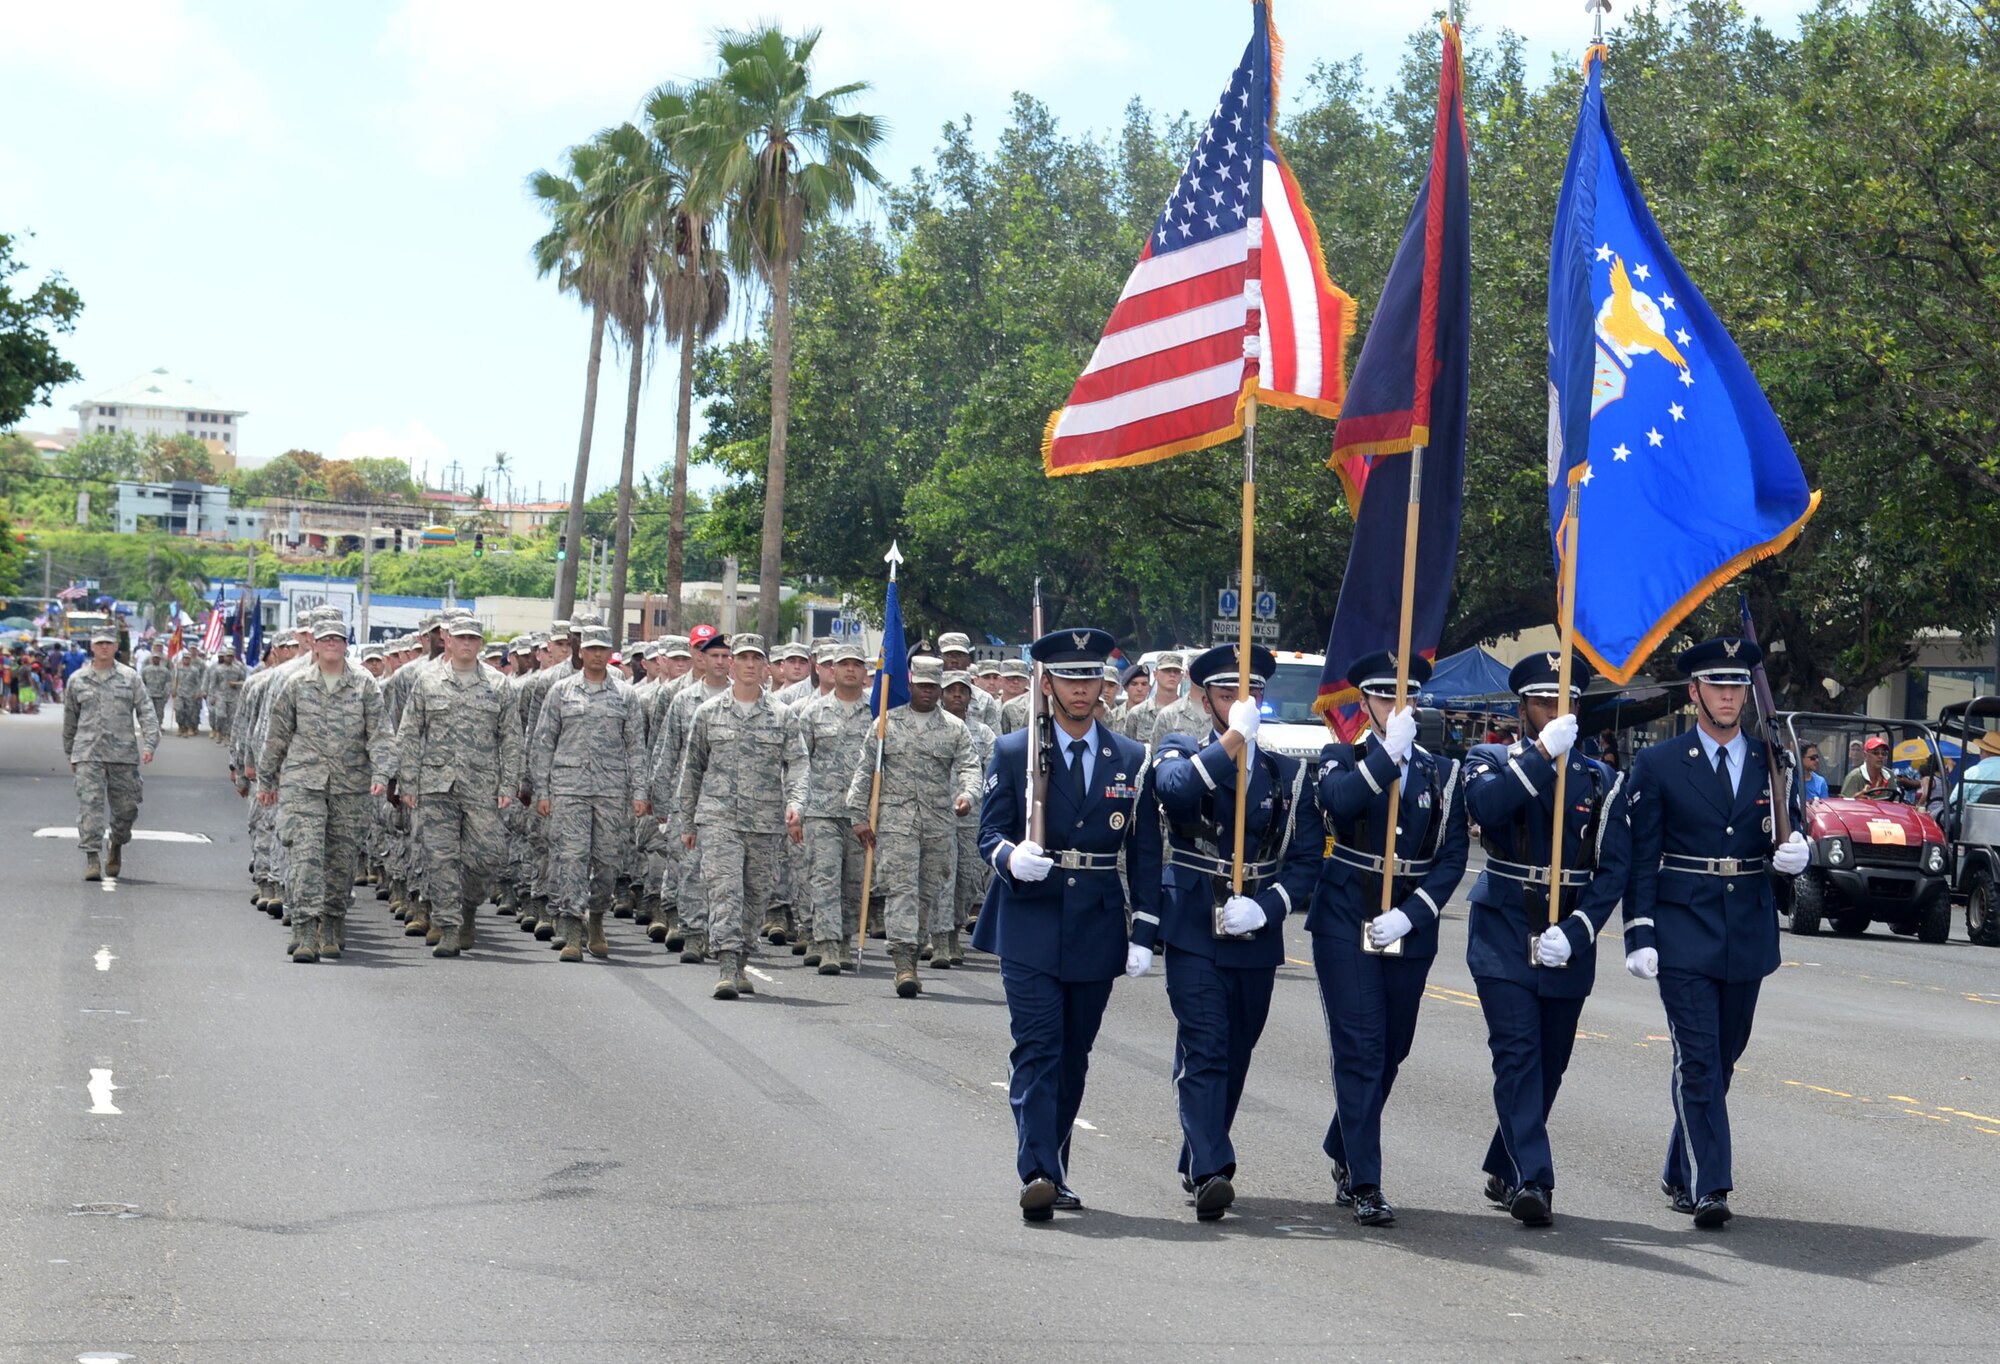 Five Andersen Blue Knights Honor Guard members lead a formation in the Liberation Day Parade July 21, 2015, in Hagåtña, Guam. Formations of active-duty service members, guardsmen and reservists, including more than 140 Airmen from the 36th Wing, marched in the parade down the 1.2-mile route past thousands of spectators. (U.S. Air Force photo by Senior Airman Joshua Smoot/Released)